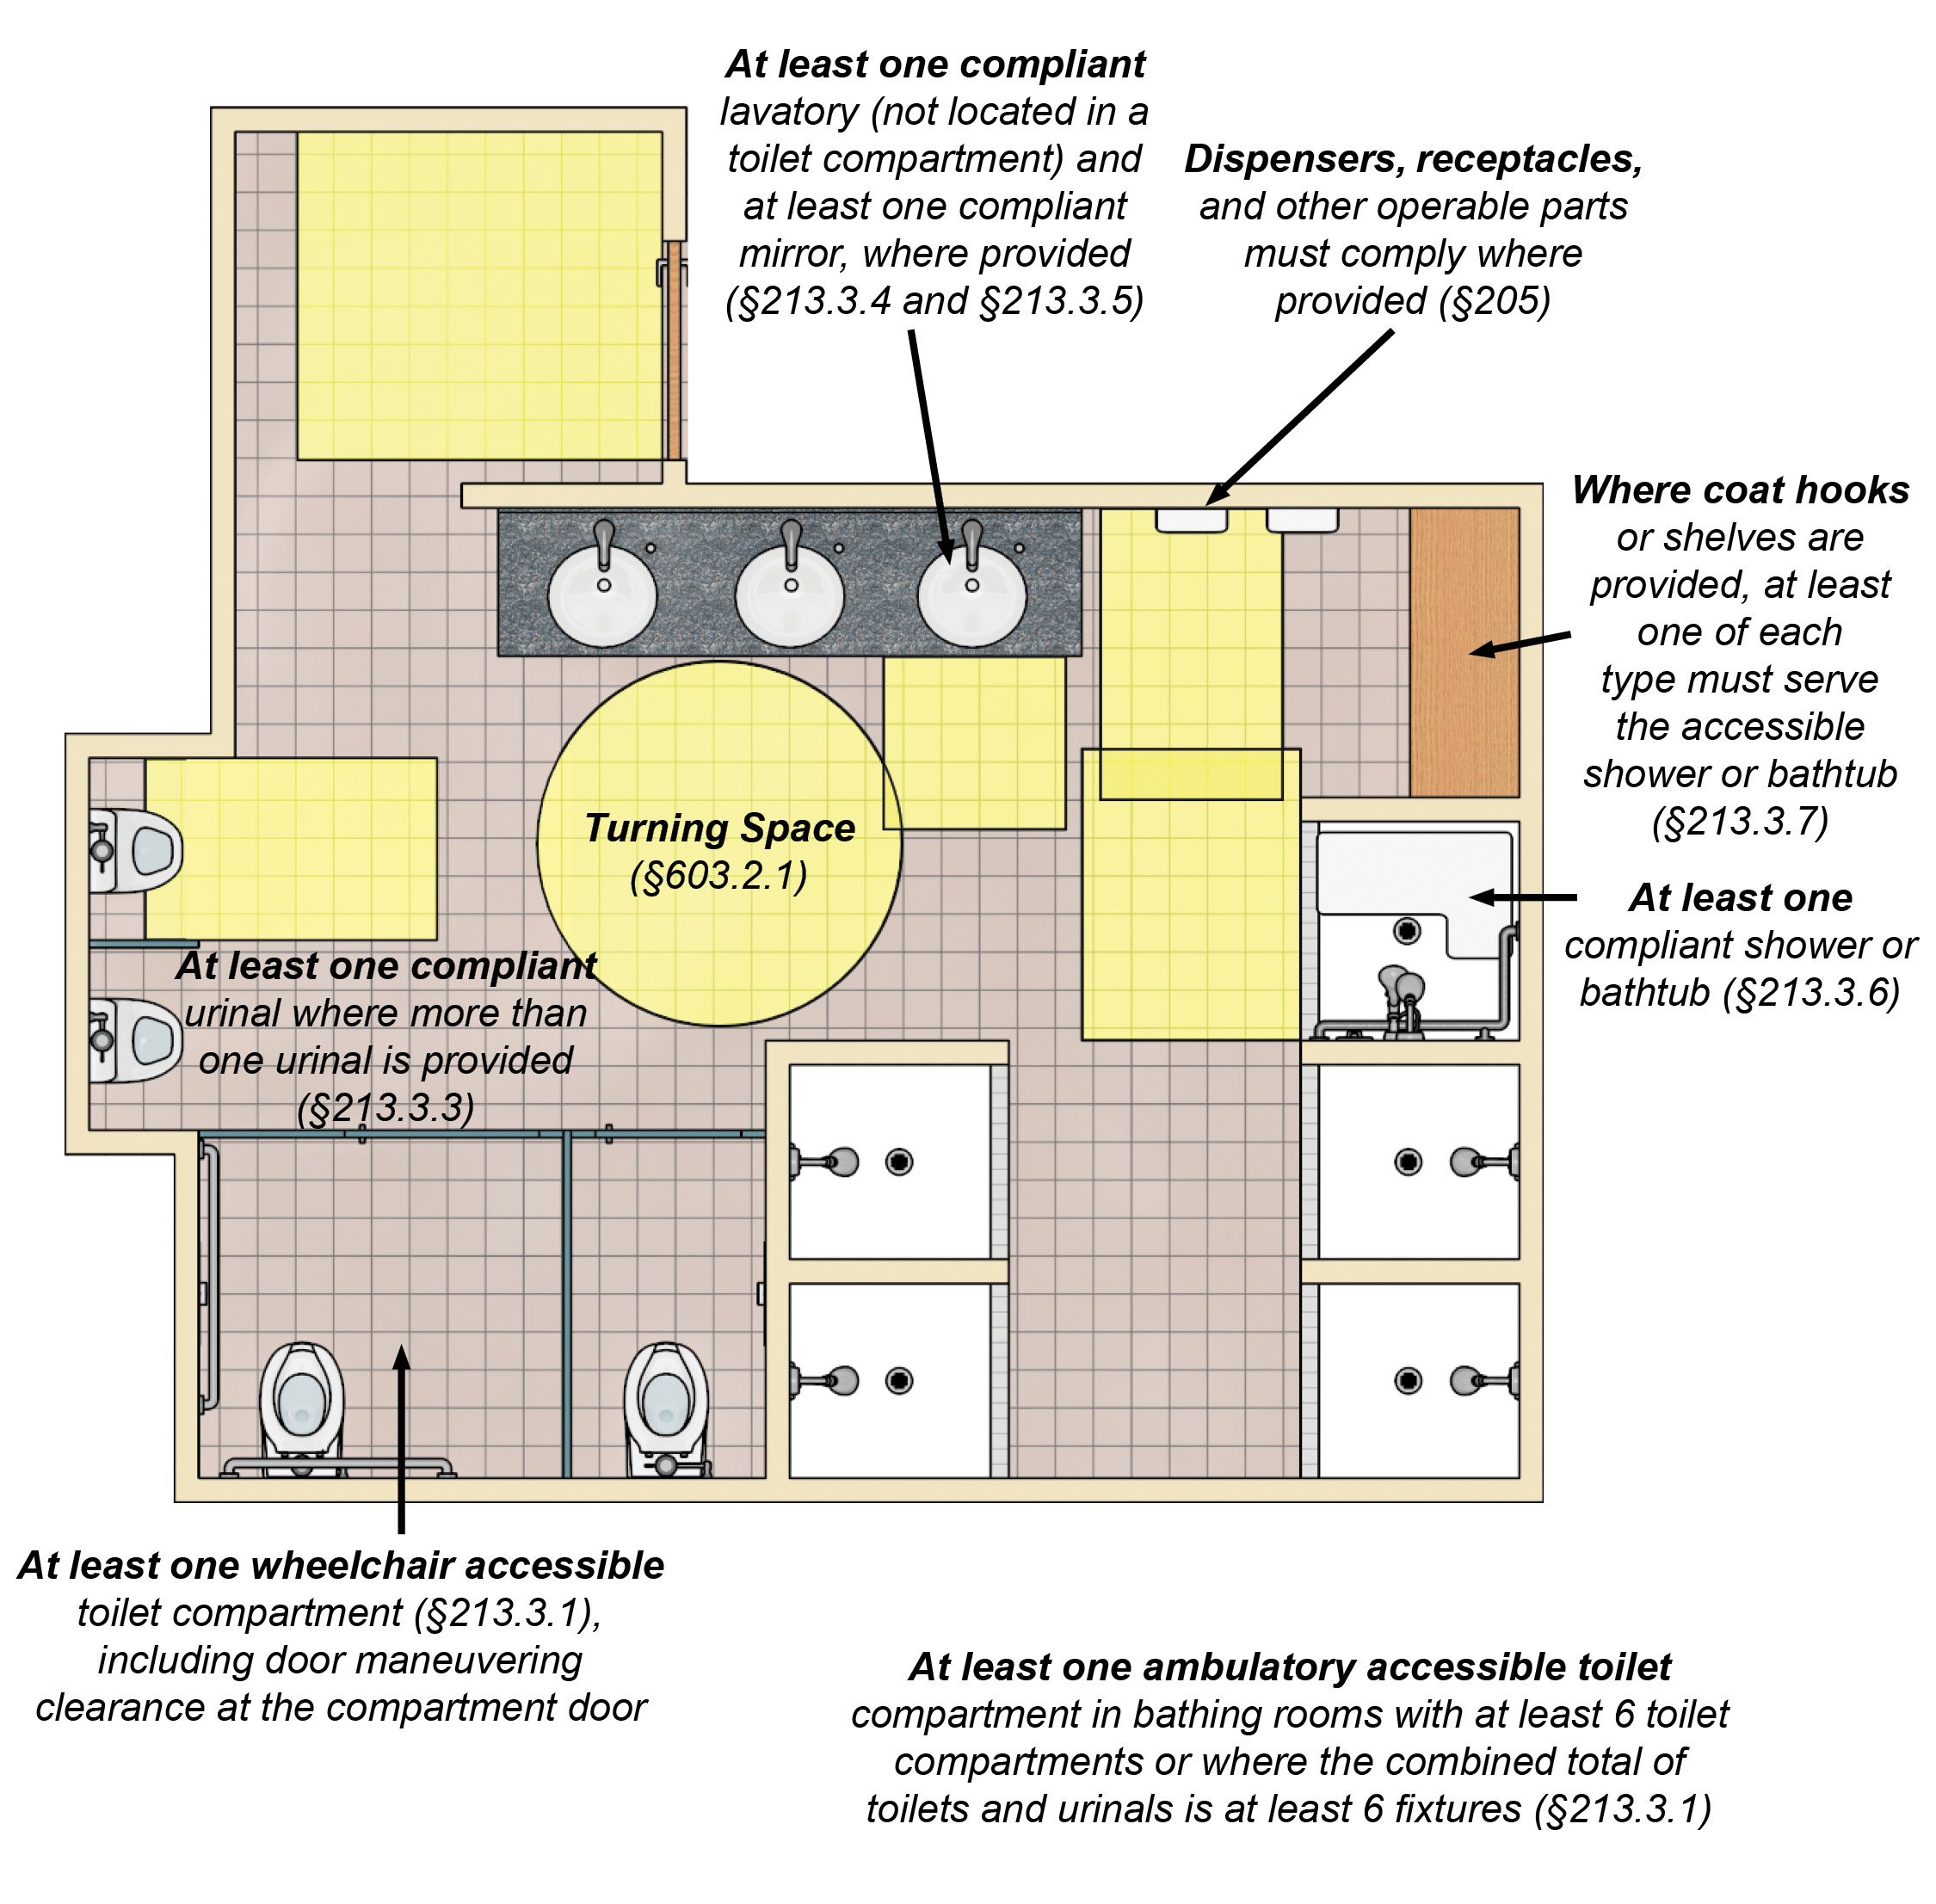 Plan view of multi-user shower room with notes: At least one
wheelchair accessible toilet compartment (§213.3.1), including door
maneuvering clearance at the compartment door. At least one ambulatory
accessible toilet compartment in restrooms with at least 6 toilet
compartments or where the combined total of toilets and urinals is at
least 6 fixtures (§213.3.1). At least one compliant urinal where more
than one urinal is provided (§213.3.3). At least one compliant lavatory
(not located in a toilet compartment) and at least one compliant mirror,
where provided (§213.3.4 and §213.3.5). At least one compliant shower or
bathtub (§213.3.6). Where coat hooks or shelves are provided, at least
one of each type must serve the accessible shower or bathtub (§213.3.7).
Dispensers, receptacles, and other operable parts must comply where
provided (§205). Turning space (§603.2.1).